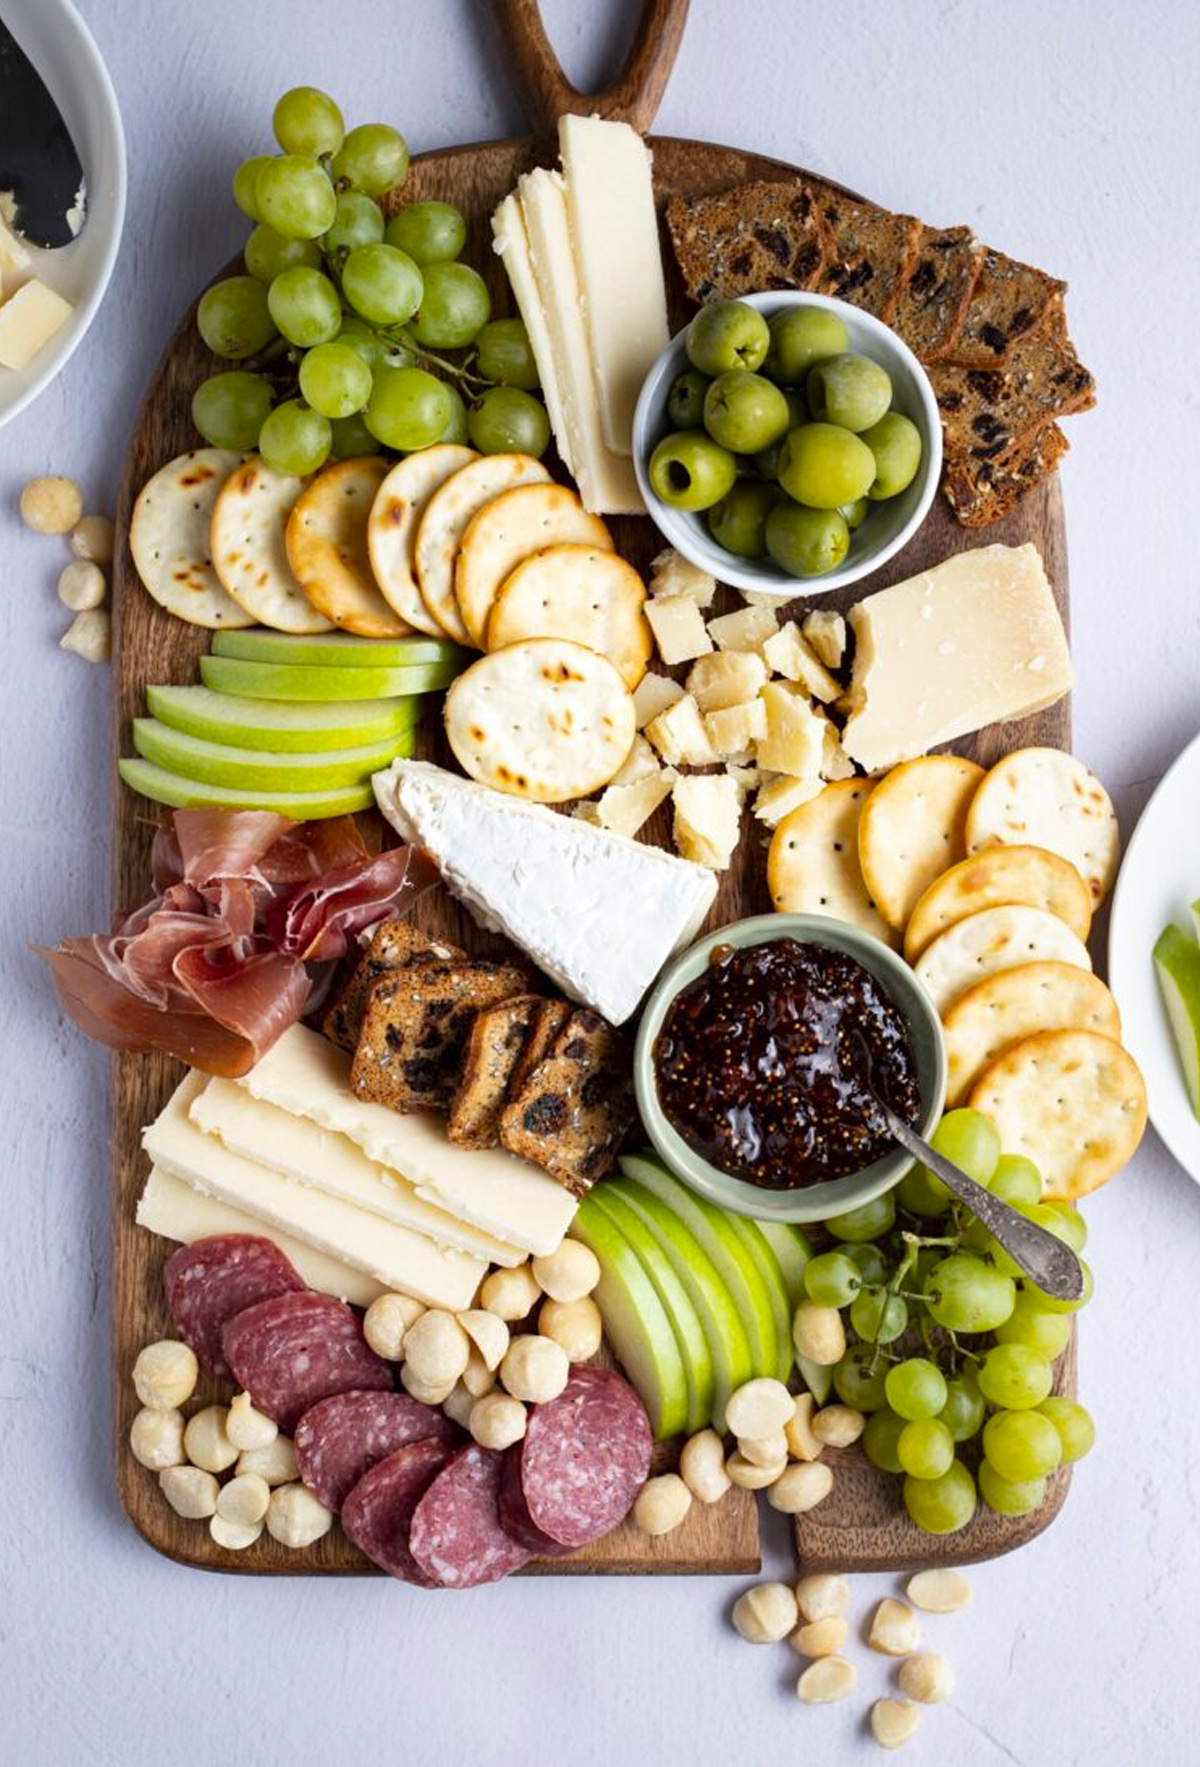 Grapes, bread, meat, cheese, nuts, and clementines fill Yoga of Cookings winter cheese board.